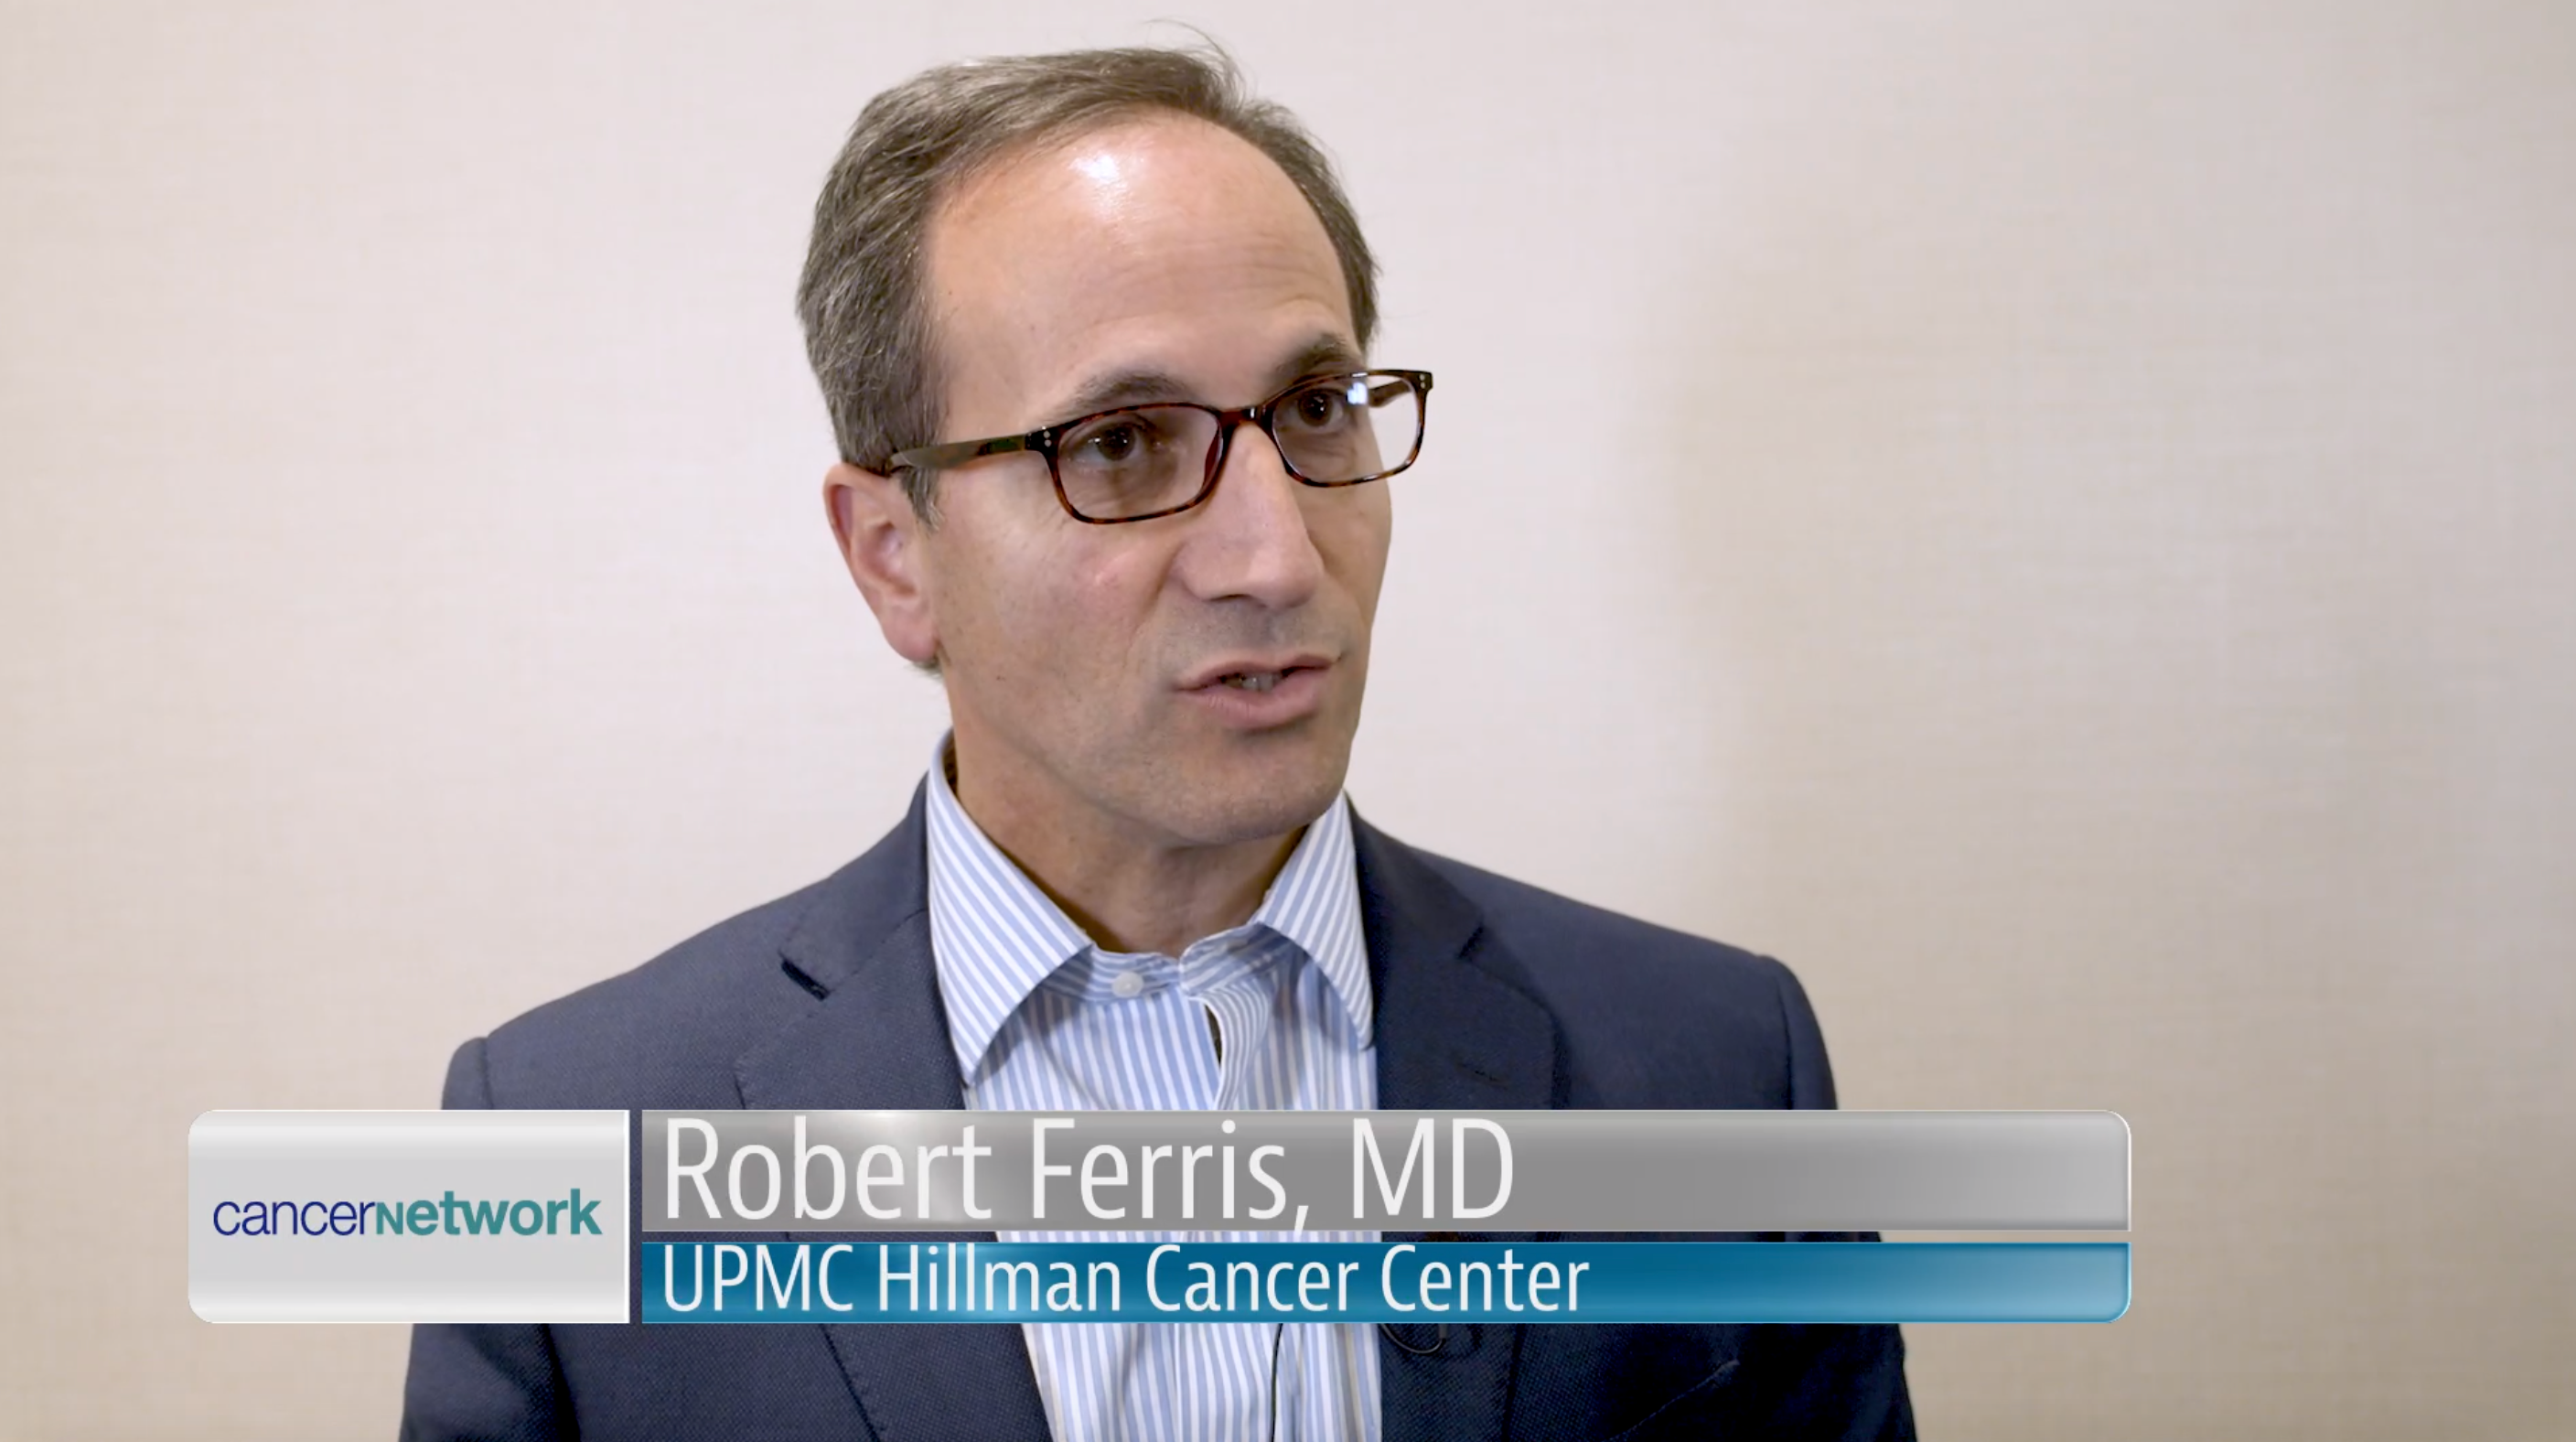 Robert Ferris, MD, on Immunotherapy Transforming Cancer Treatment